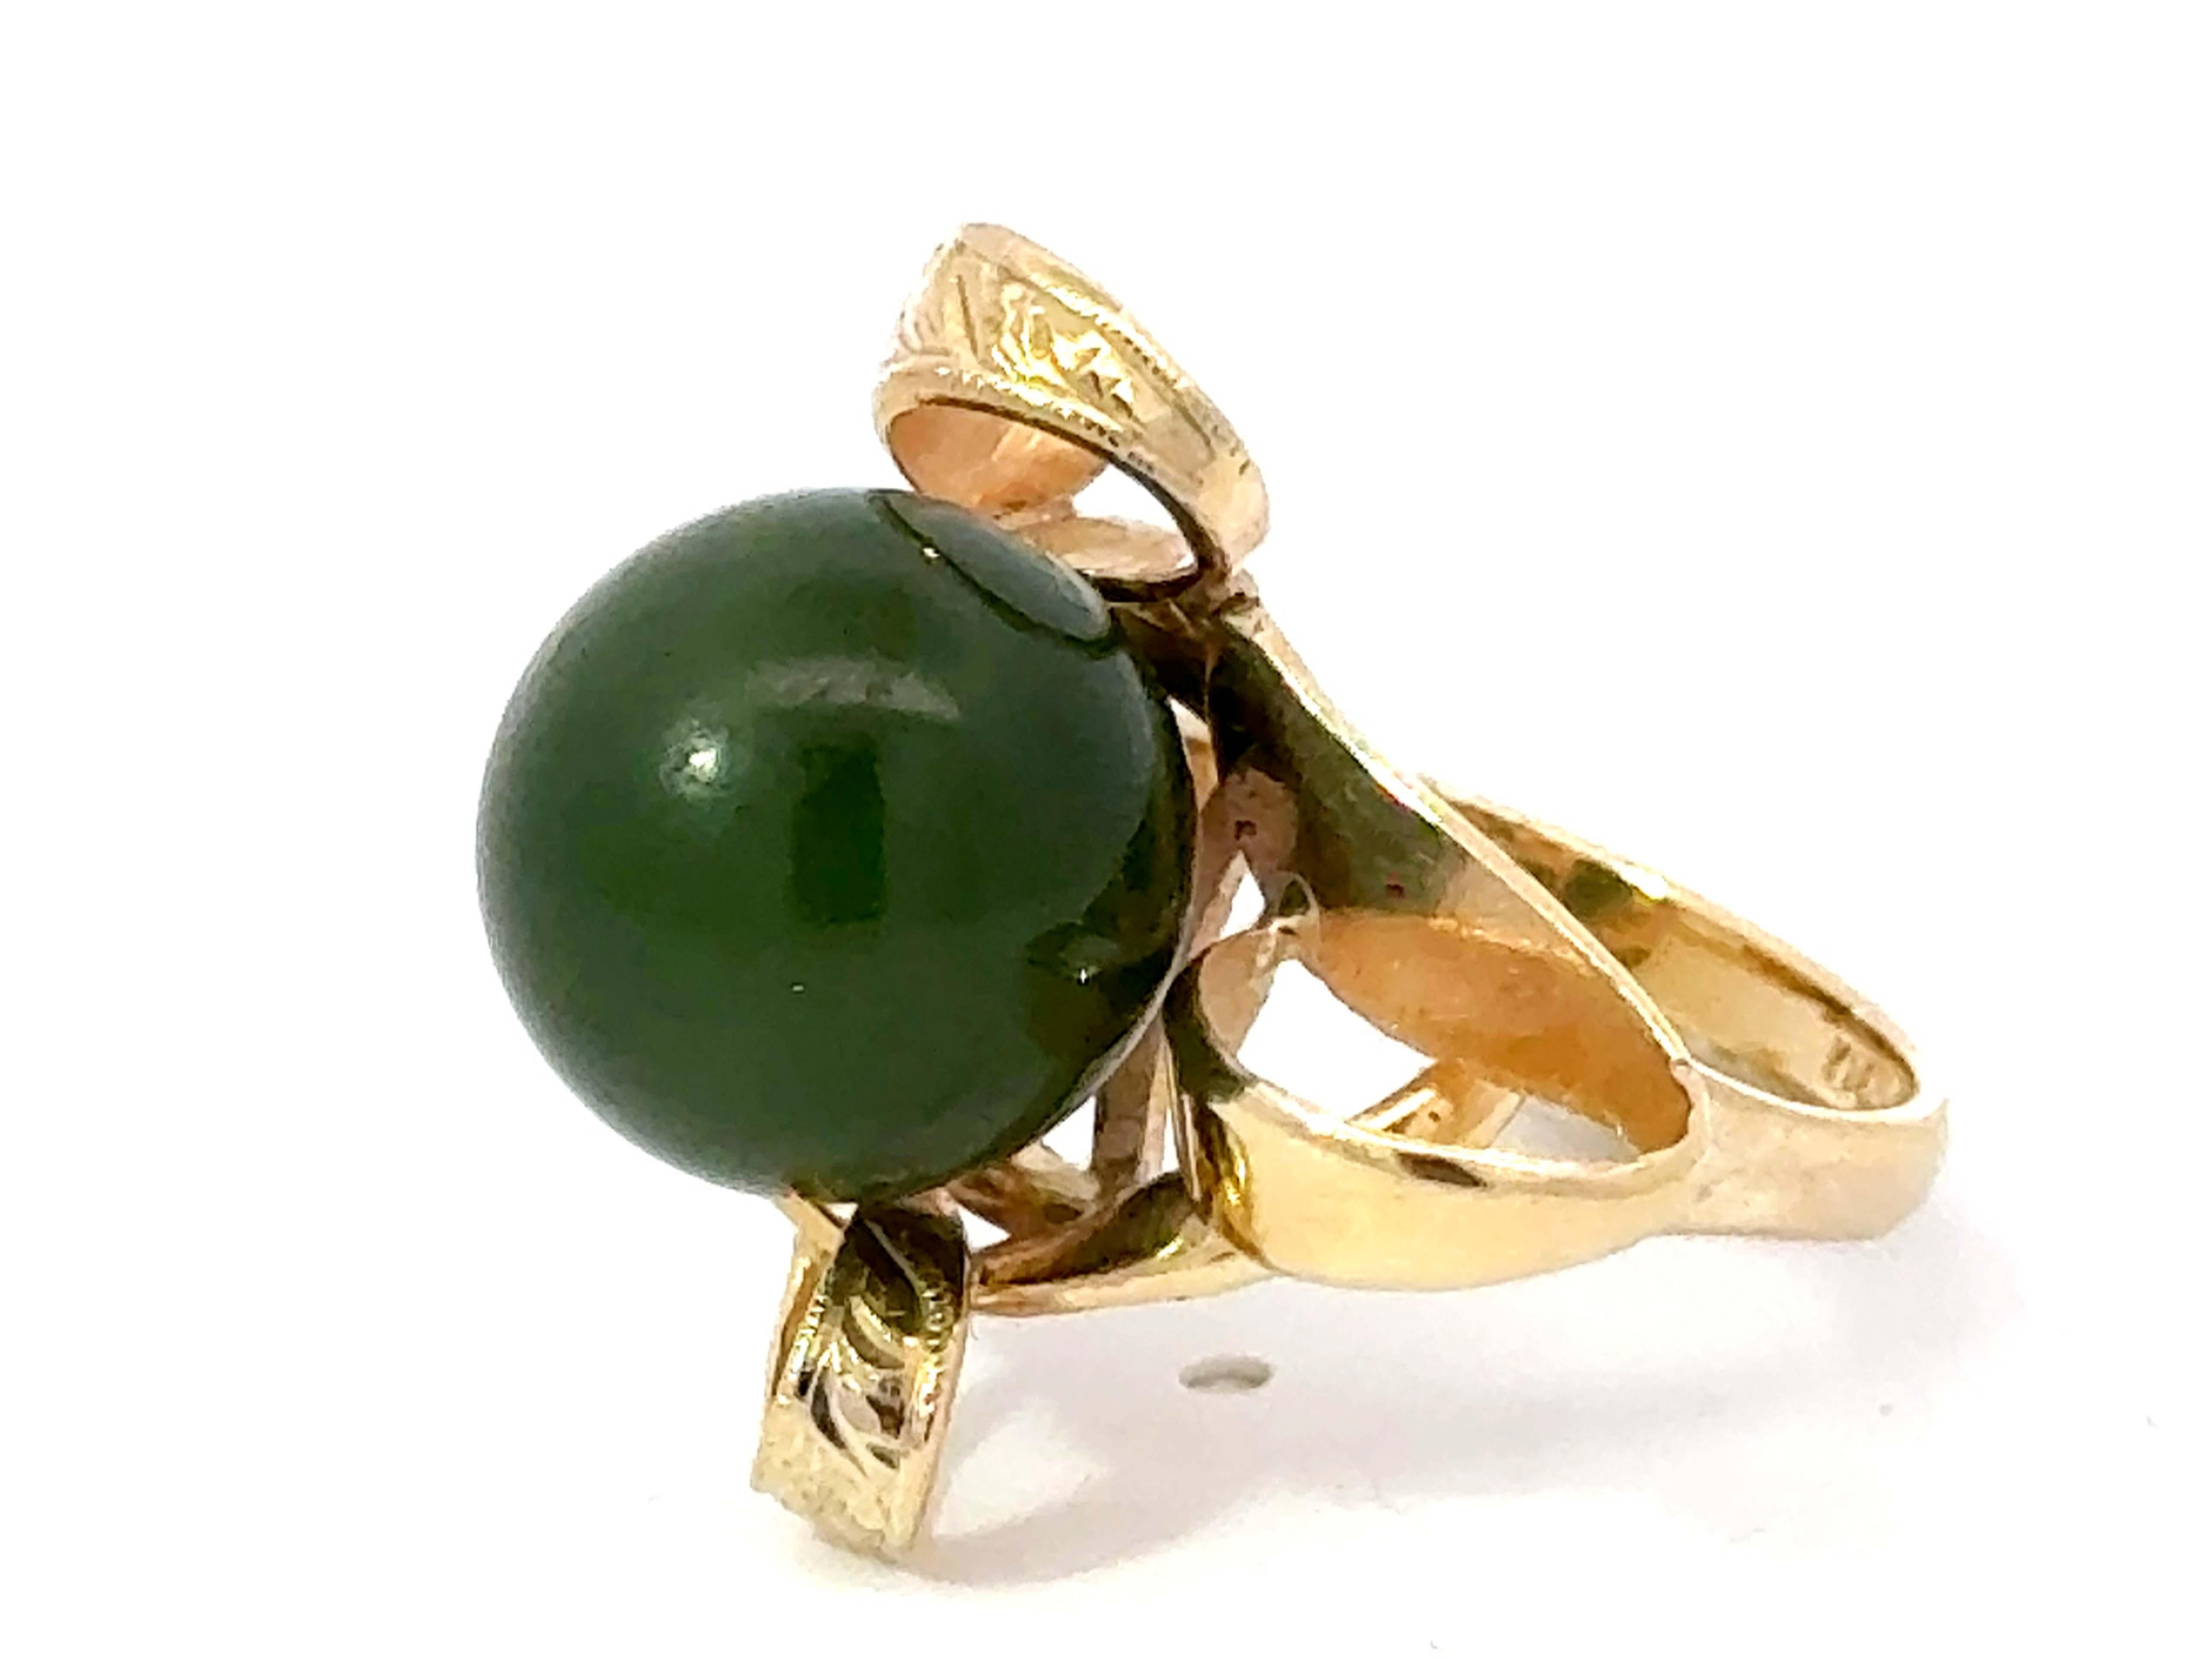 Olive Green Jade Bead Ring 18k Yellow Gold In Excellent Condition For Sale In Honolulu, HI